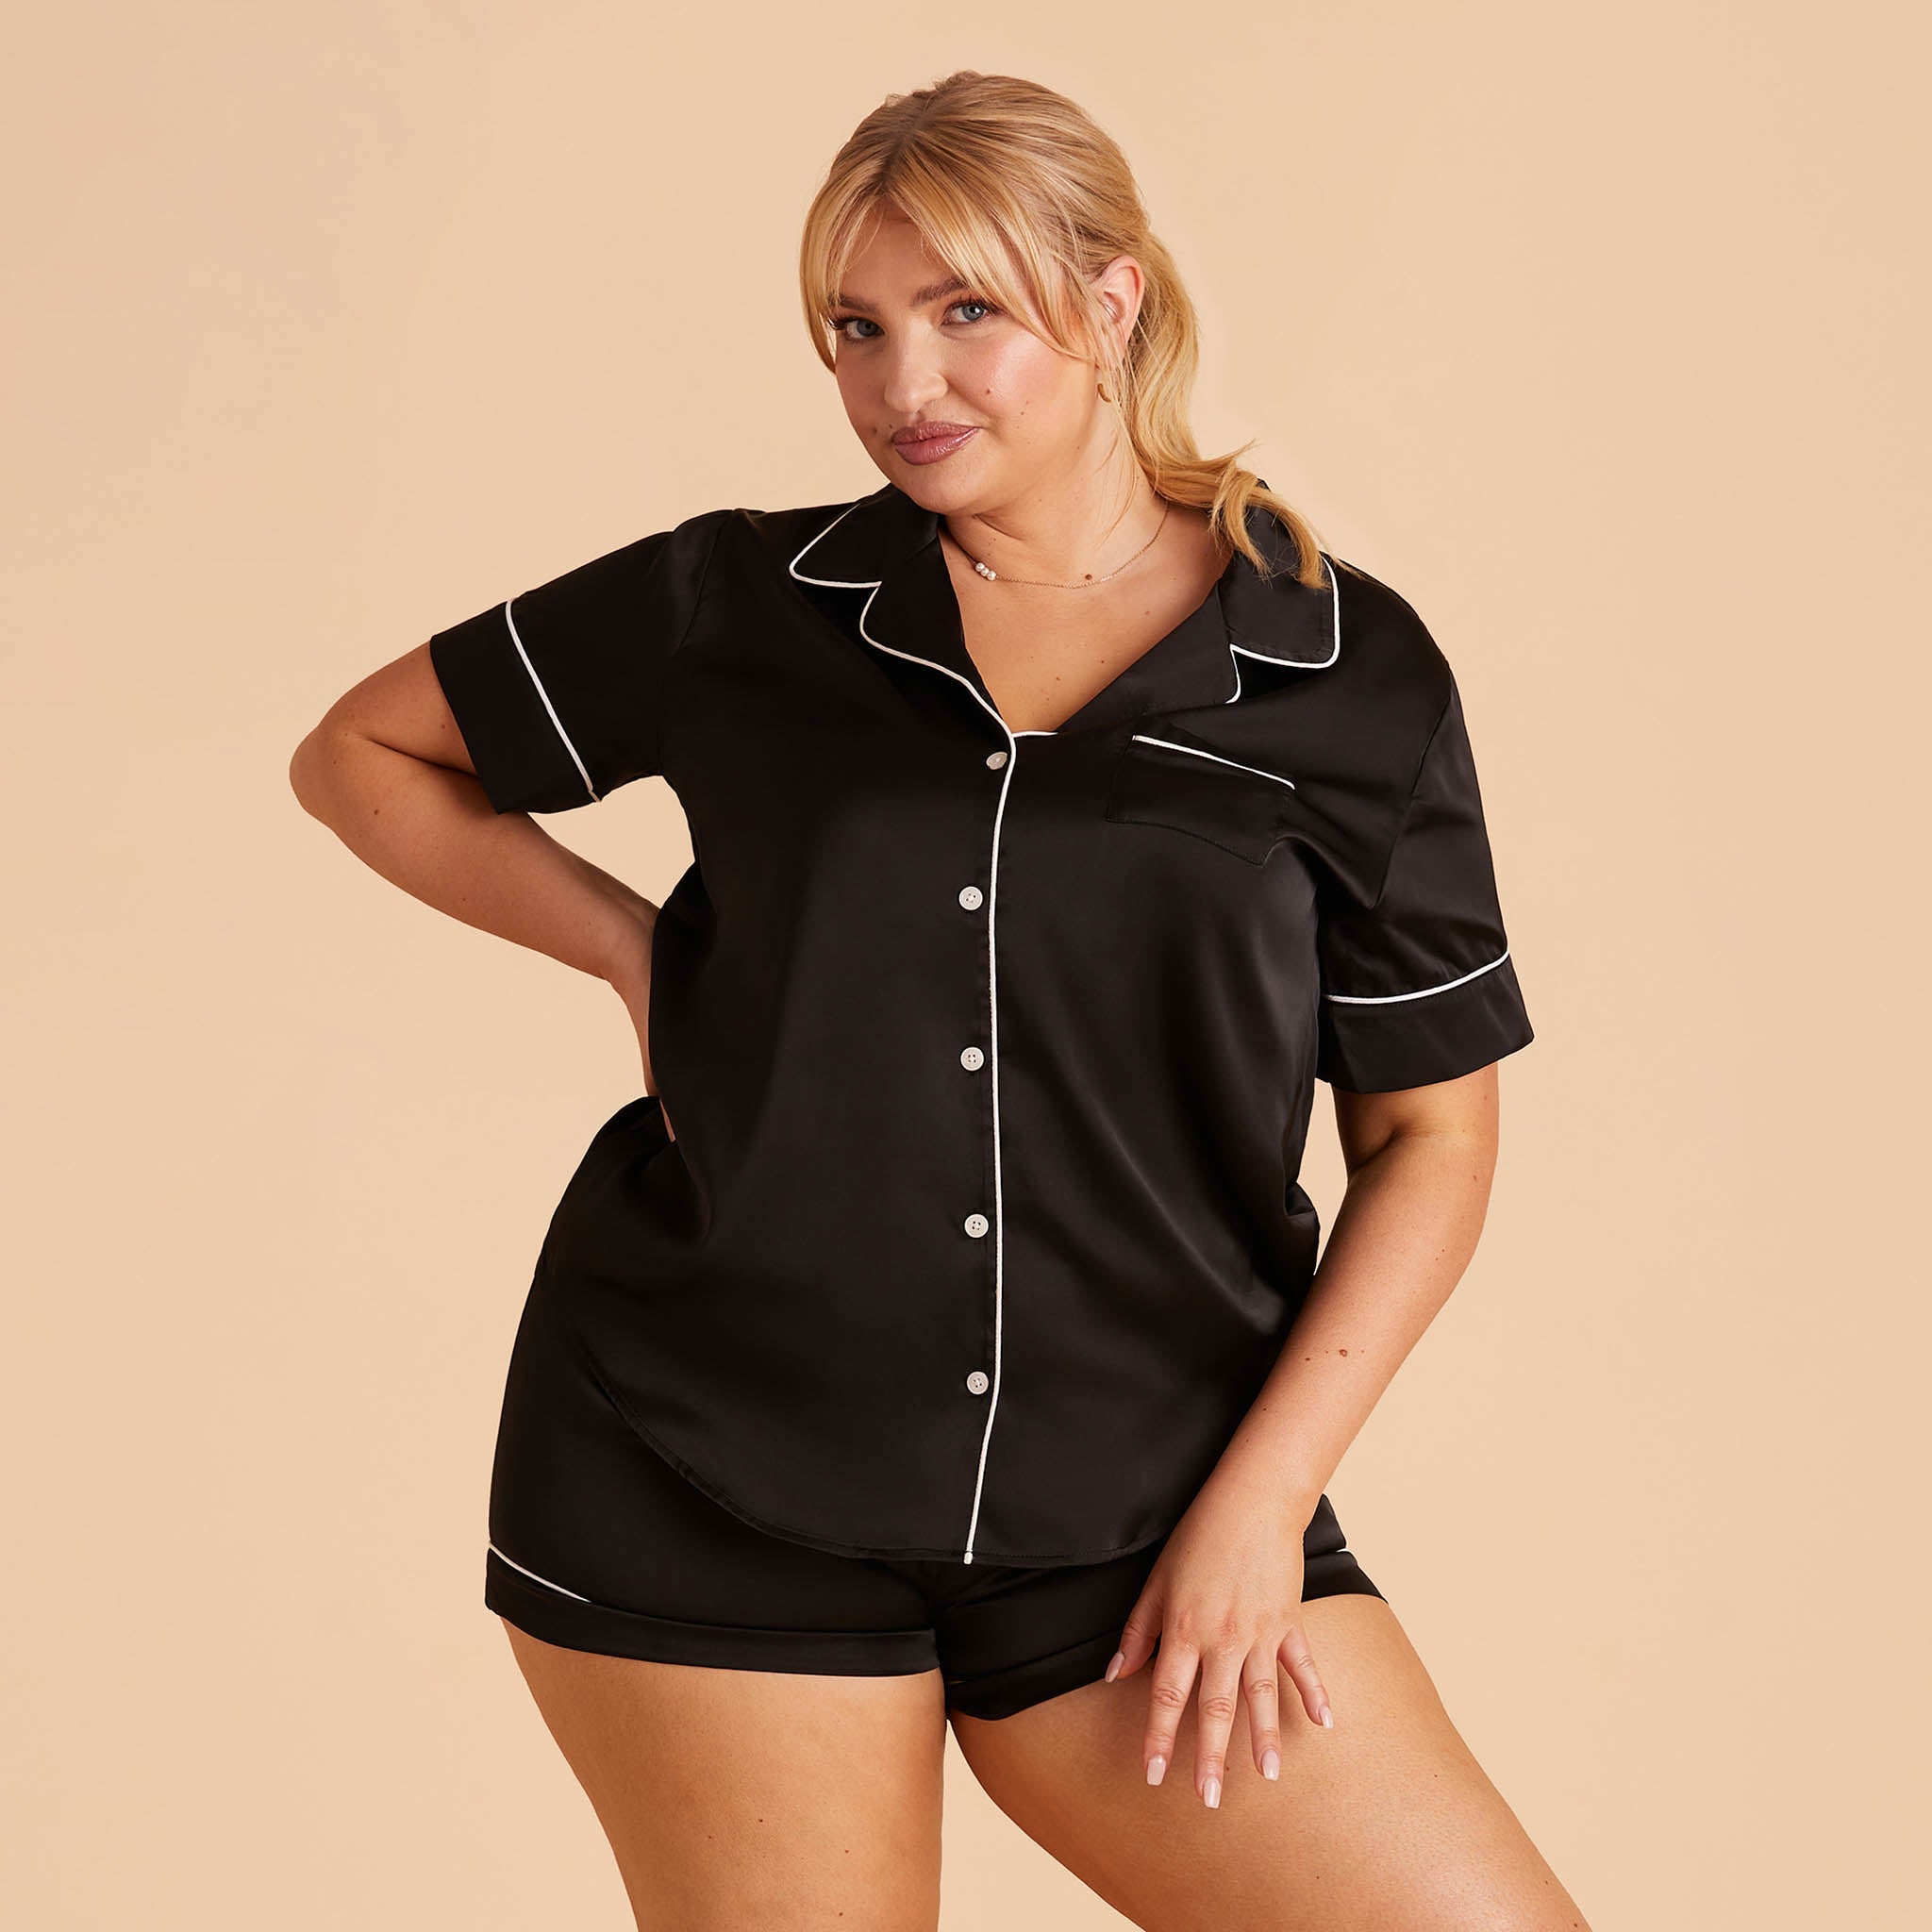 Jonny Satin Short Sleeve Bridesmaid Pajamas With White Piping in black, front view